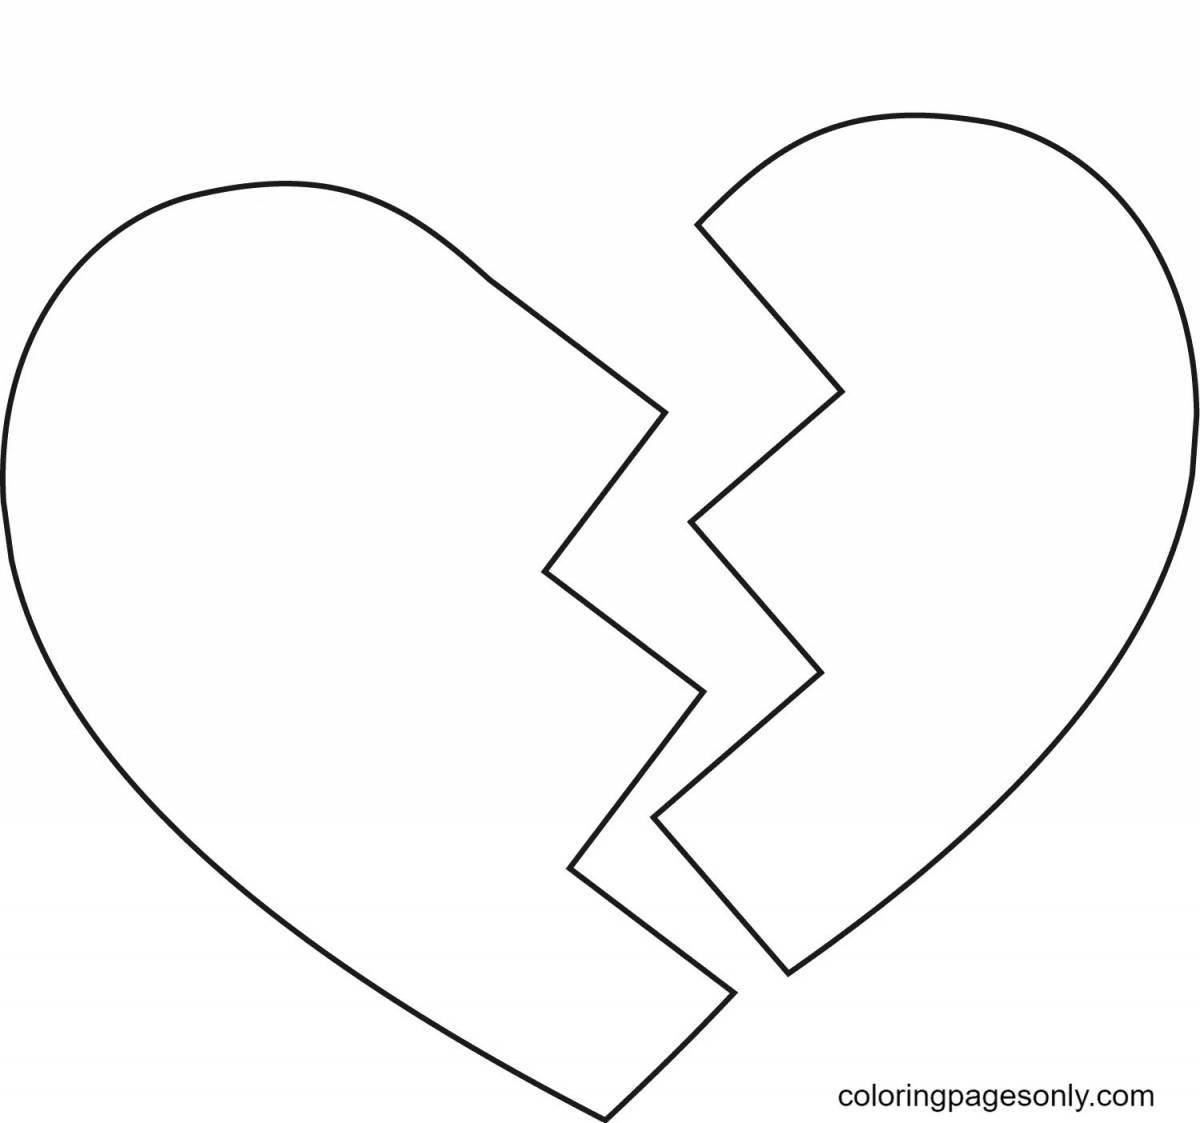 Playful broken heart coloring page